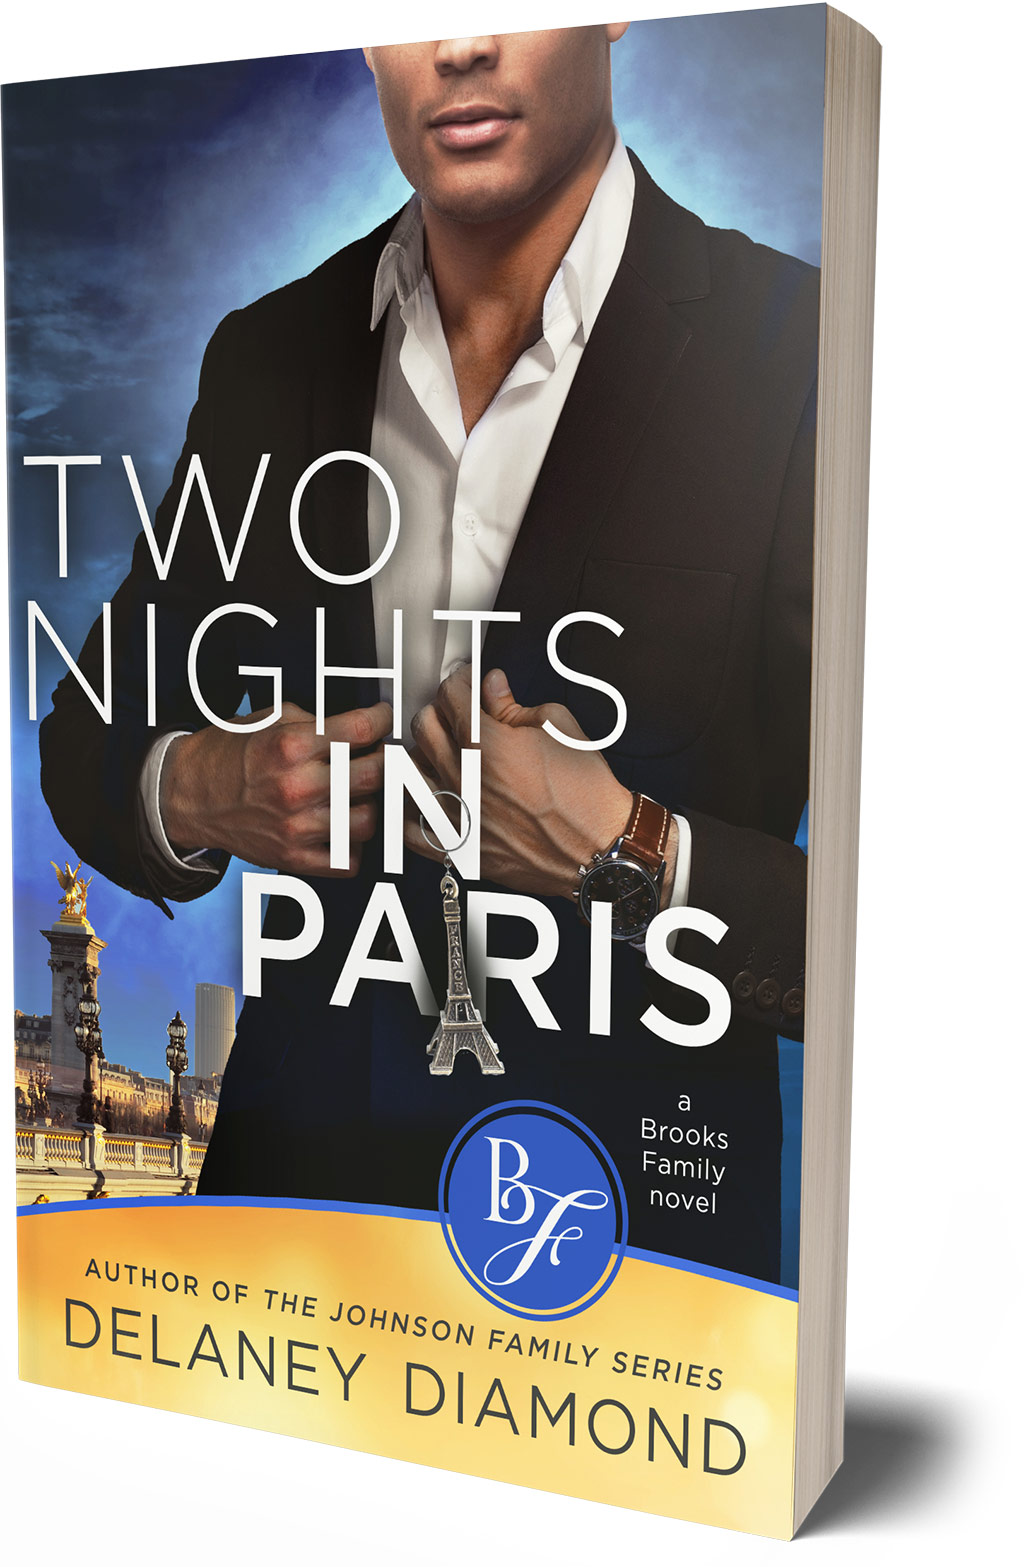 Two Nights in Paris, The Brooks Family Book 5, by Delaney Diamond